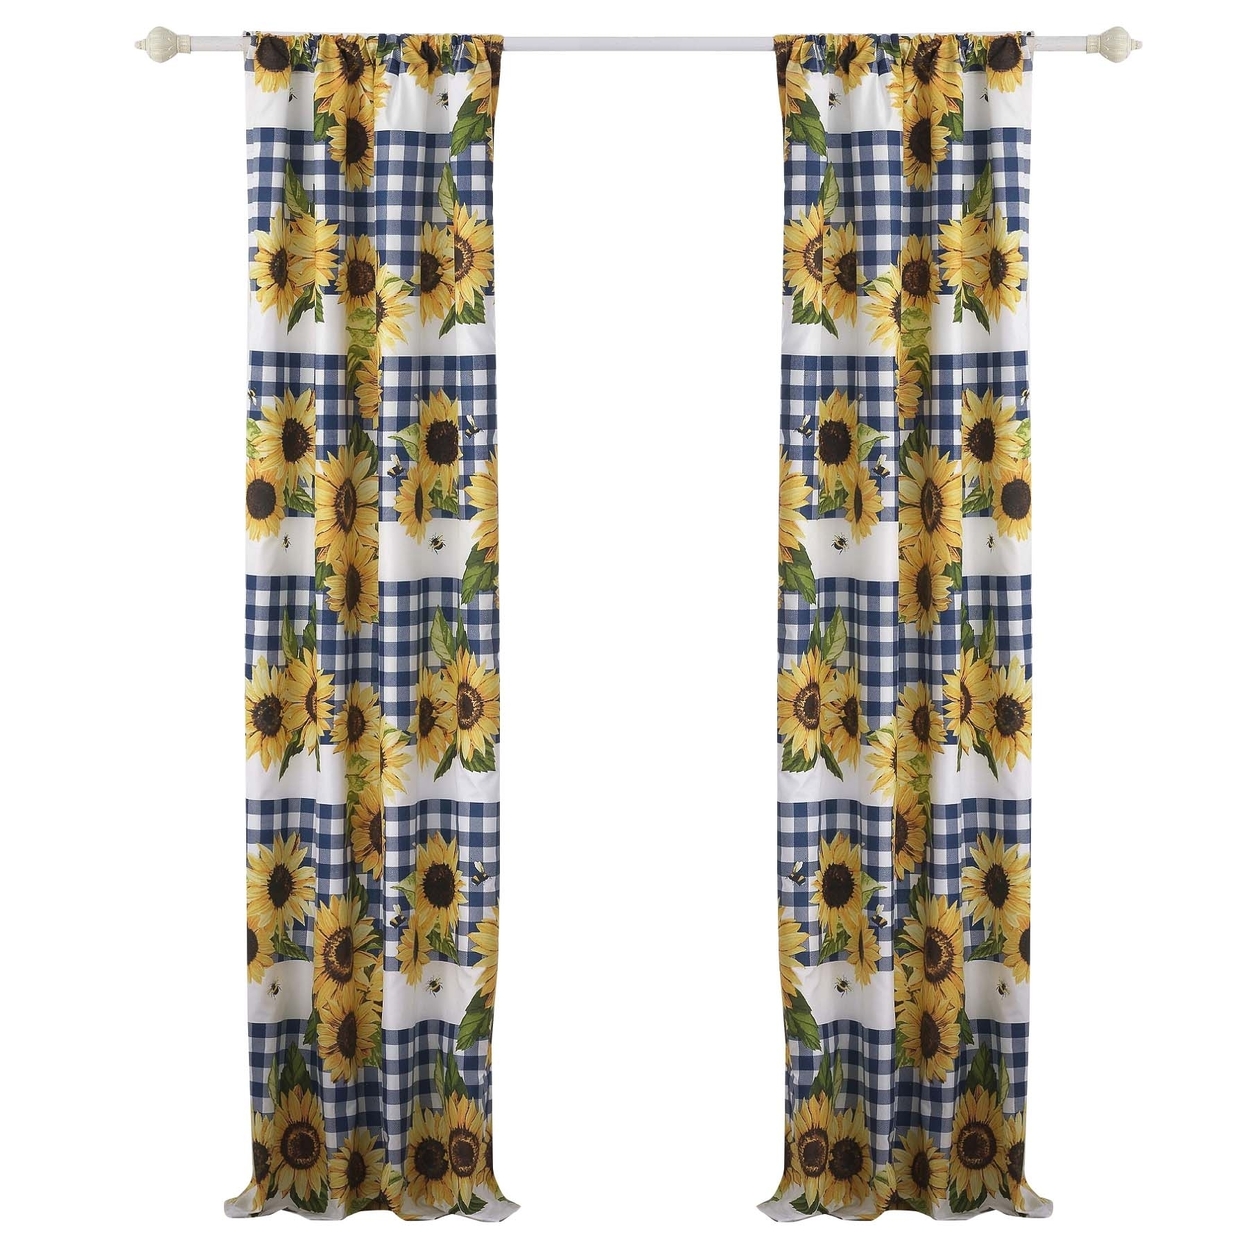 Oslo 84 Inch Panel Curtains, Microfiber Polyester, Yellow Sunflower Print